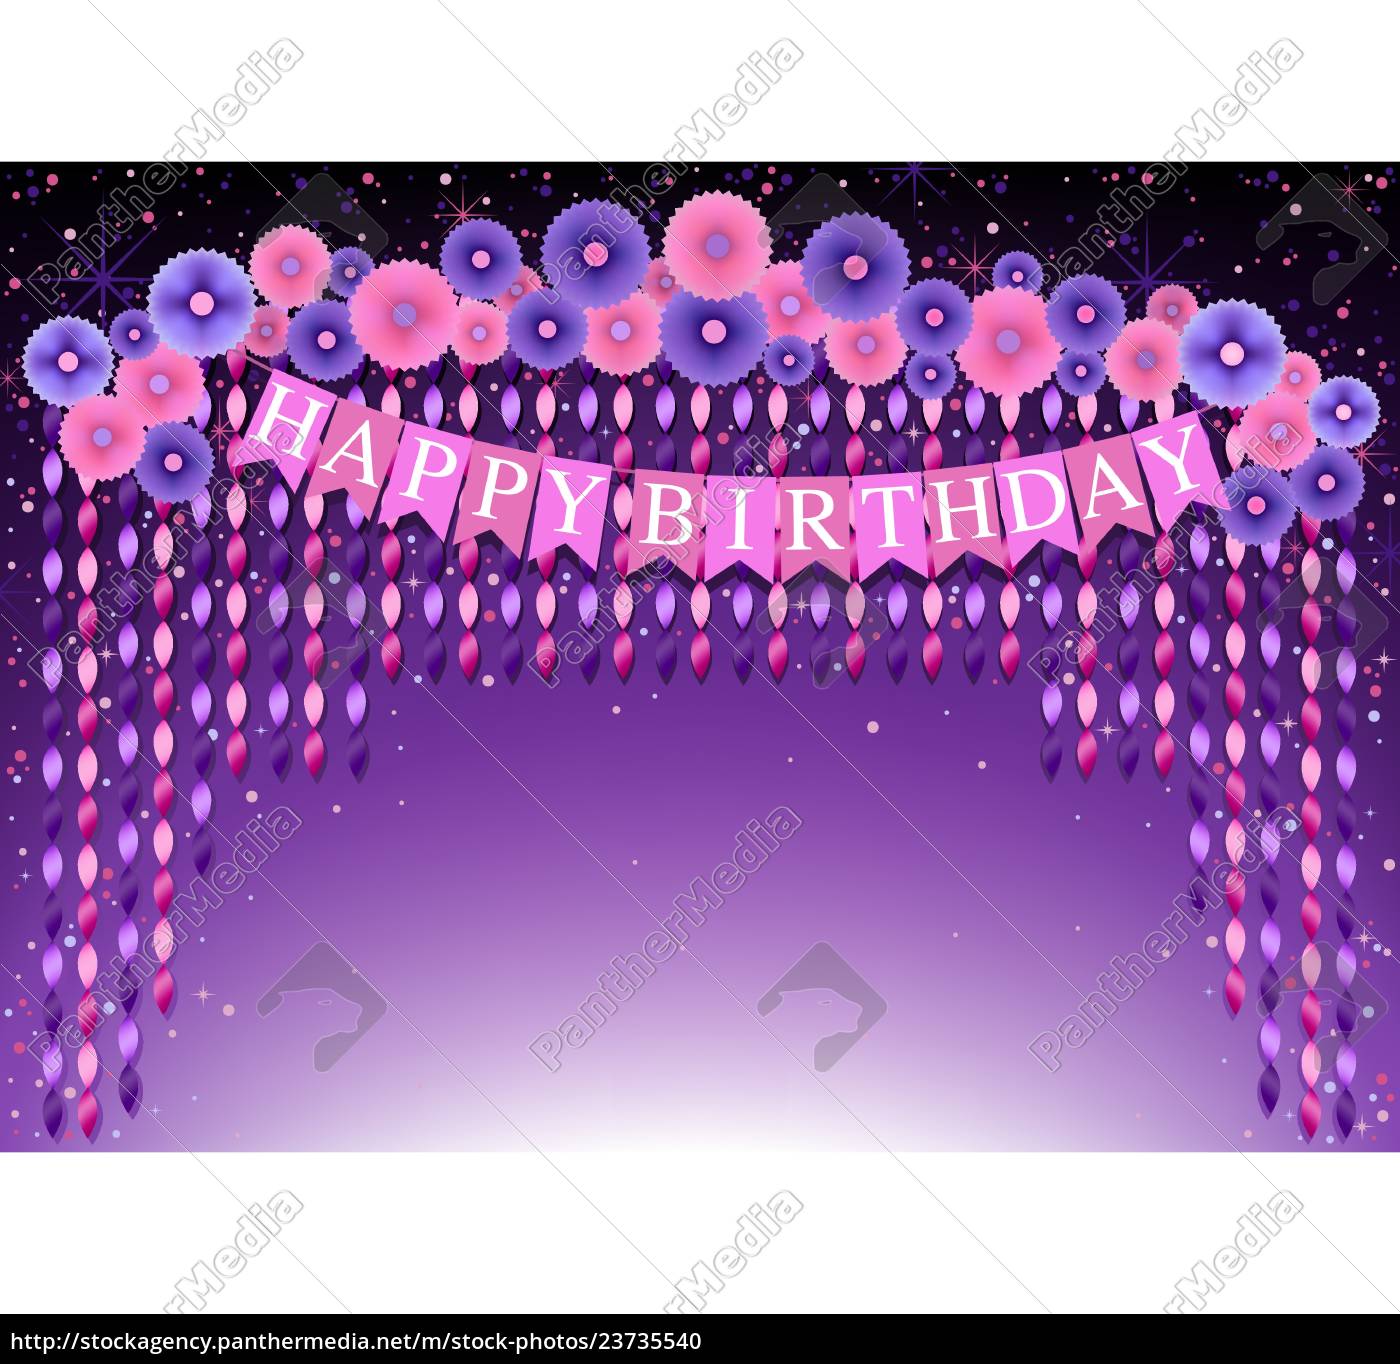 Happy Birthday Background With Purple And Pink Paper Royalty Free Photo 23735540 Panthermedia Stock Agency